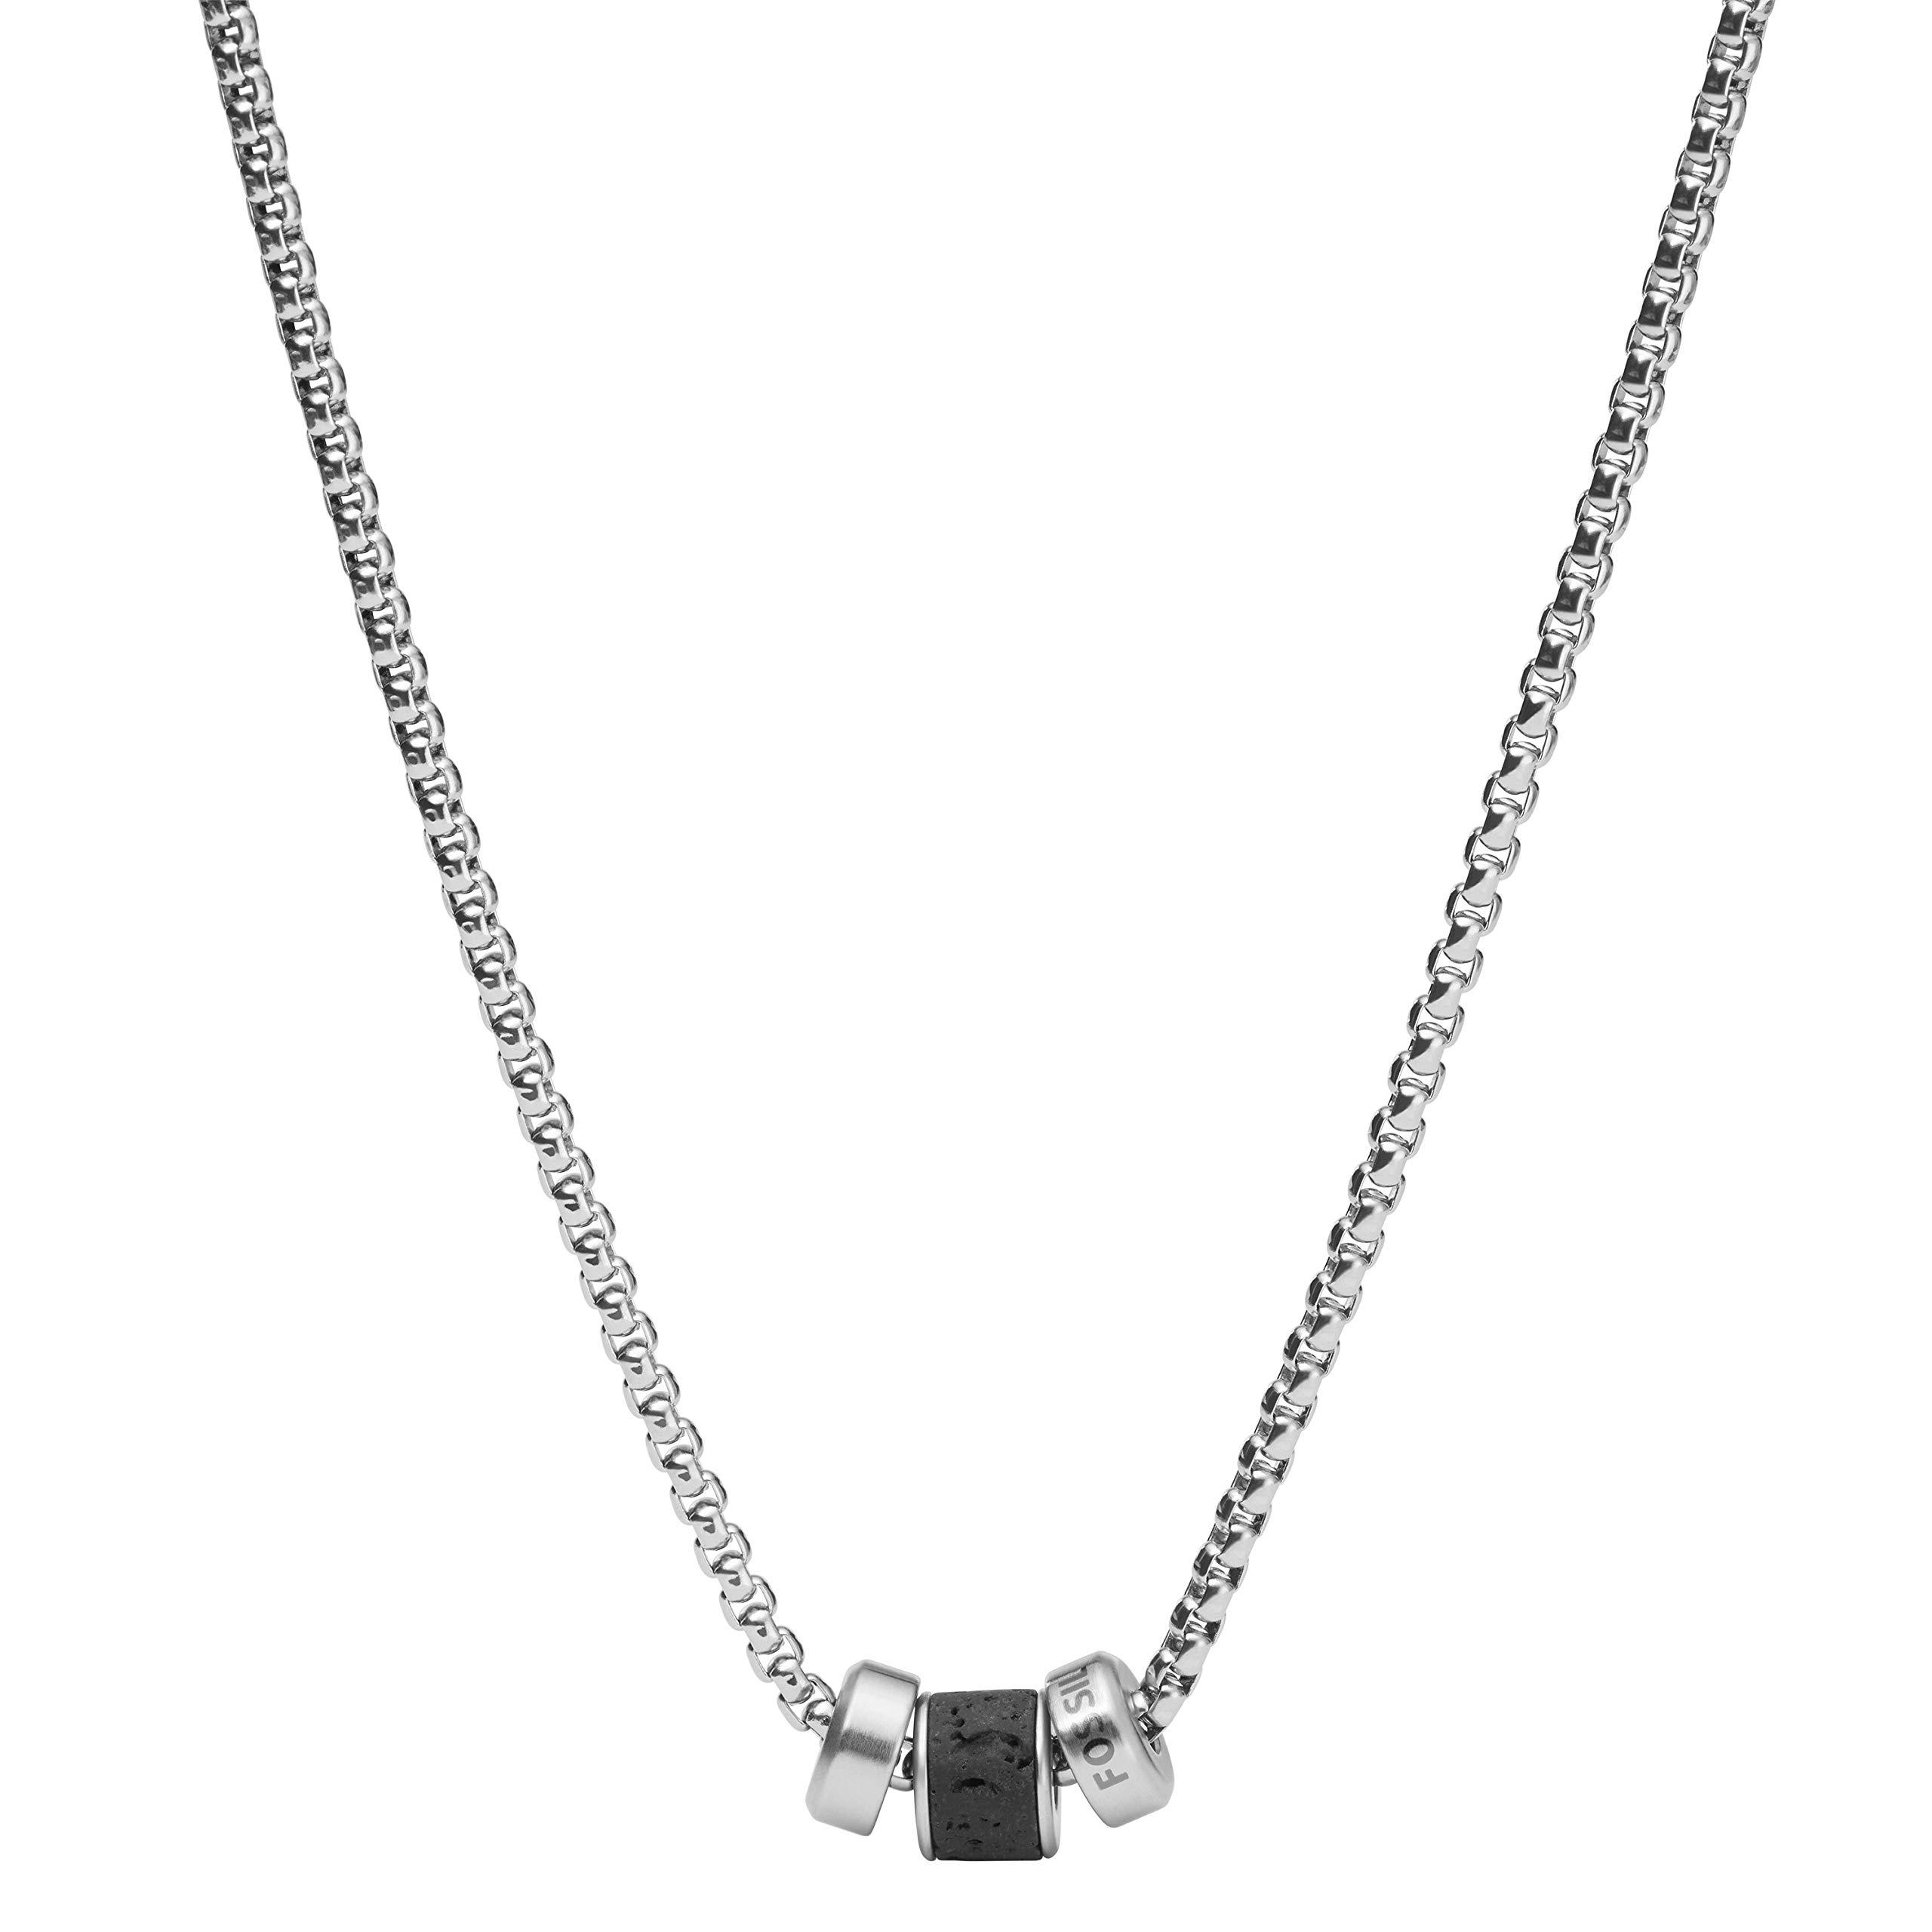 Fossil Stainless Steel Necklace in Silver (Metallic) - Lyst